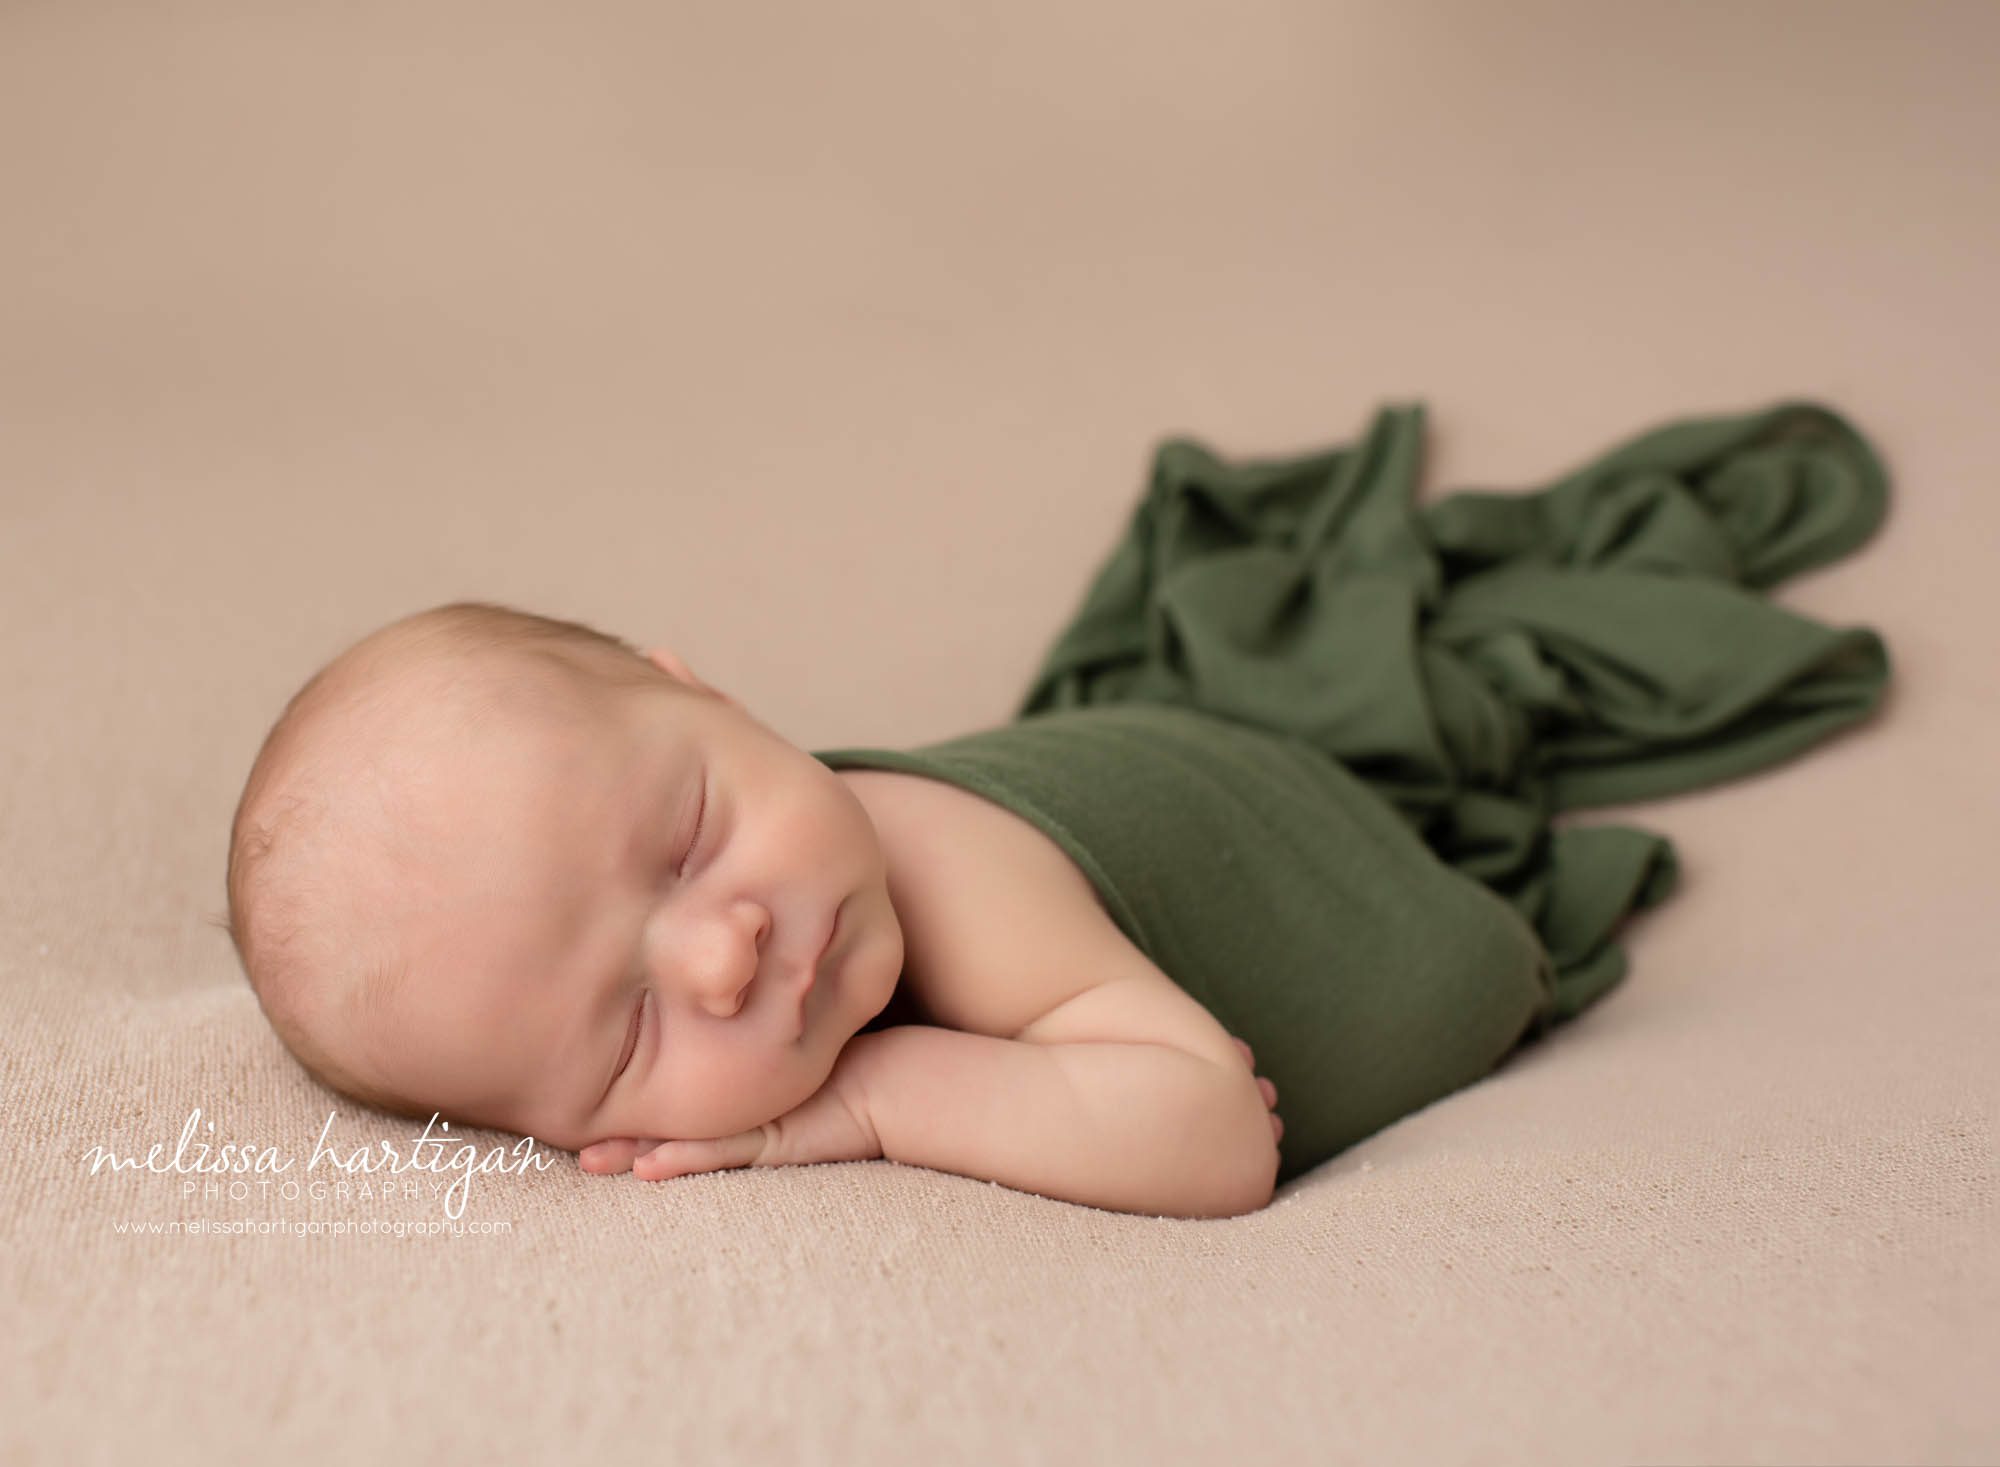 newborn baby boy posed on tummy with hand under cheek green wrap draped over baby